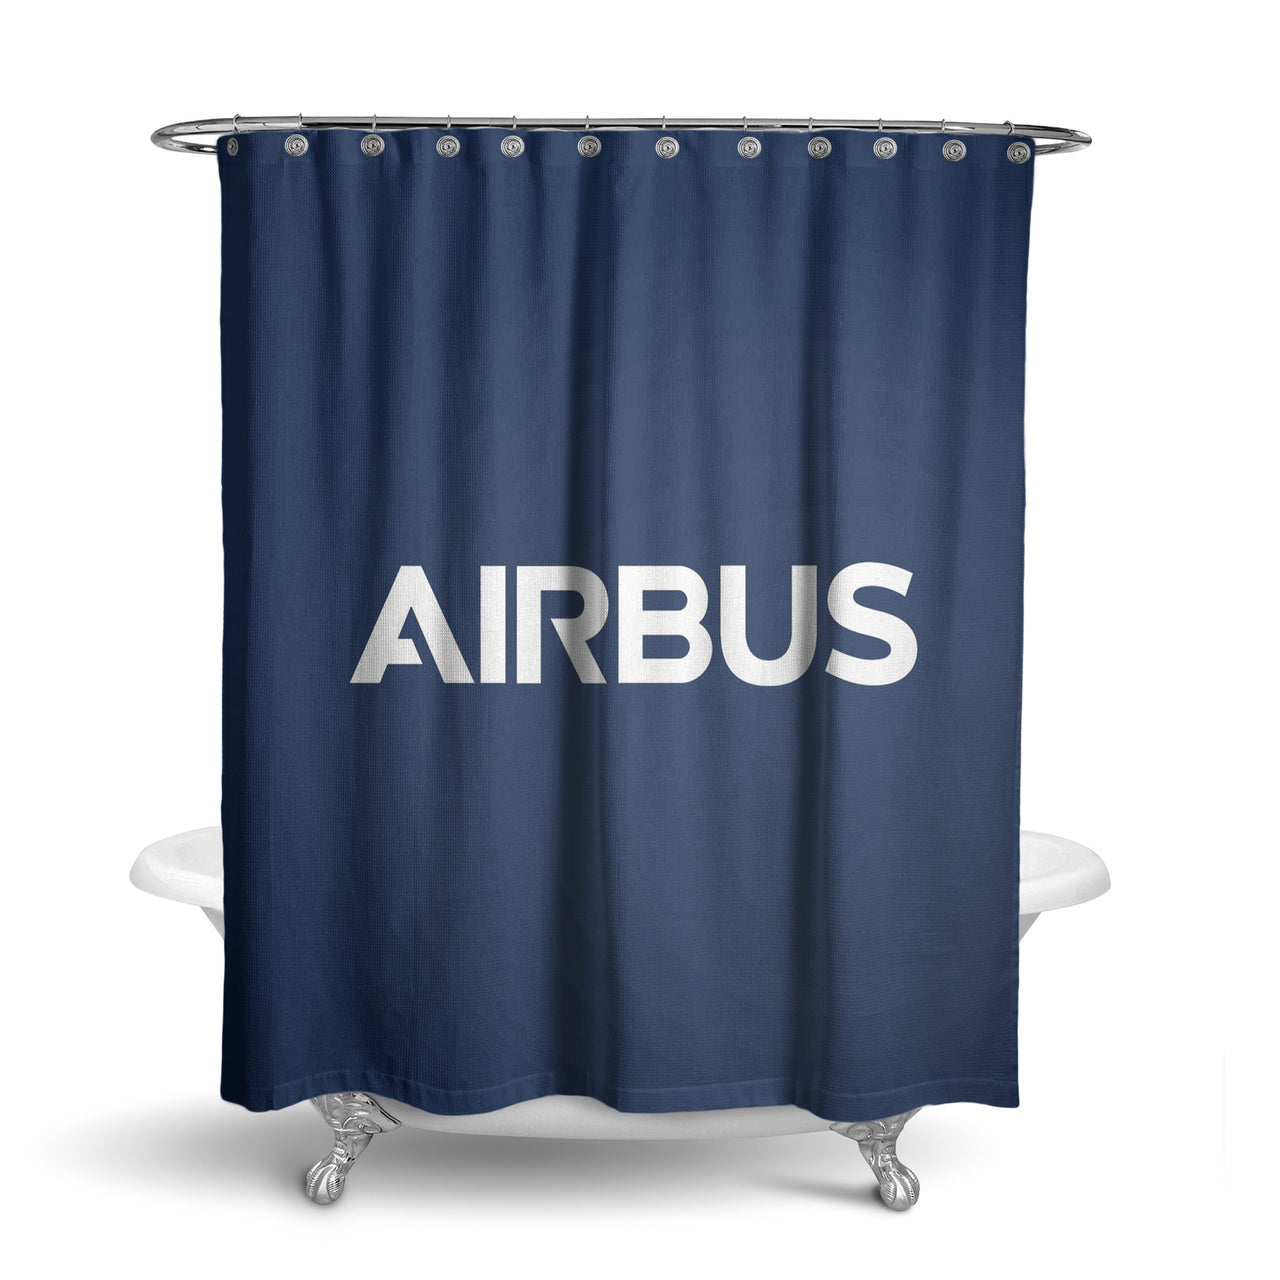 Airbus & Text Designed Shower Curtains